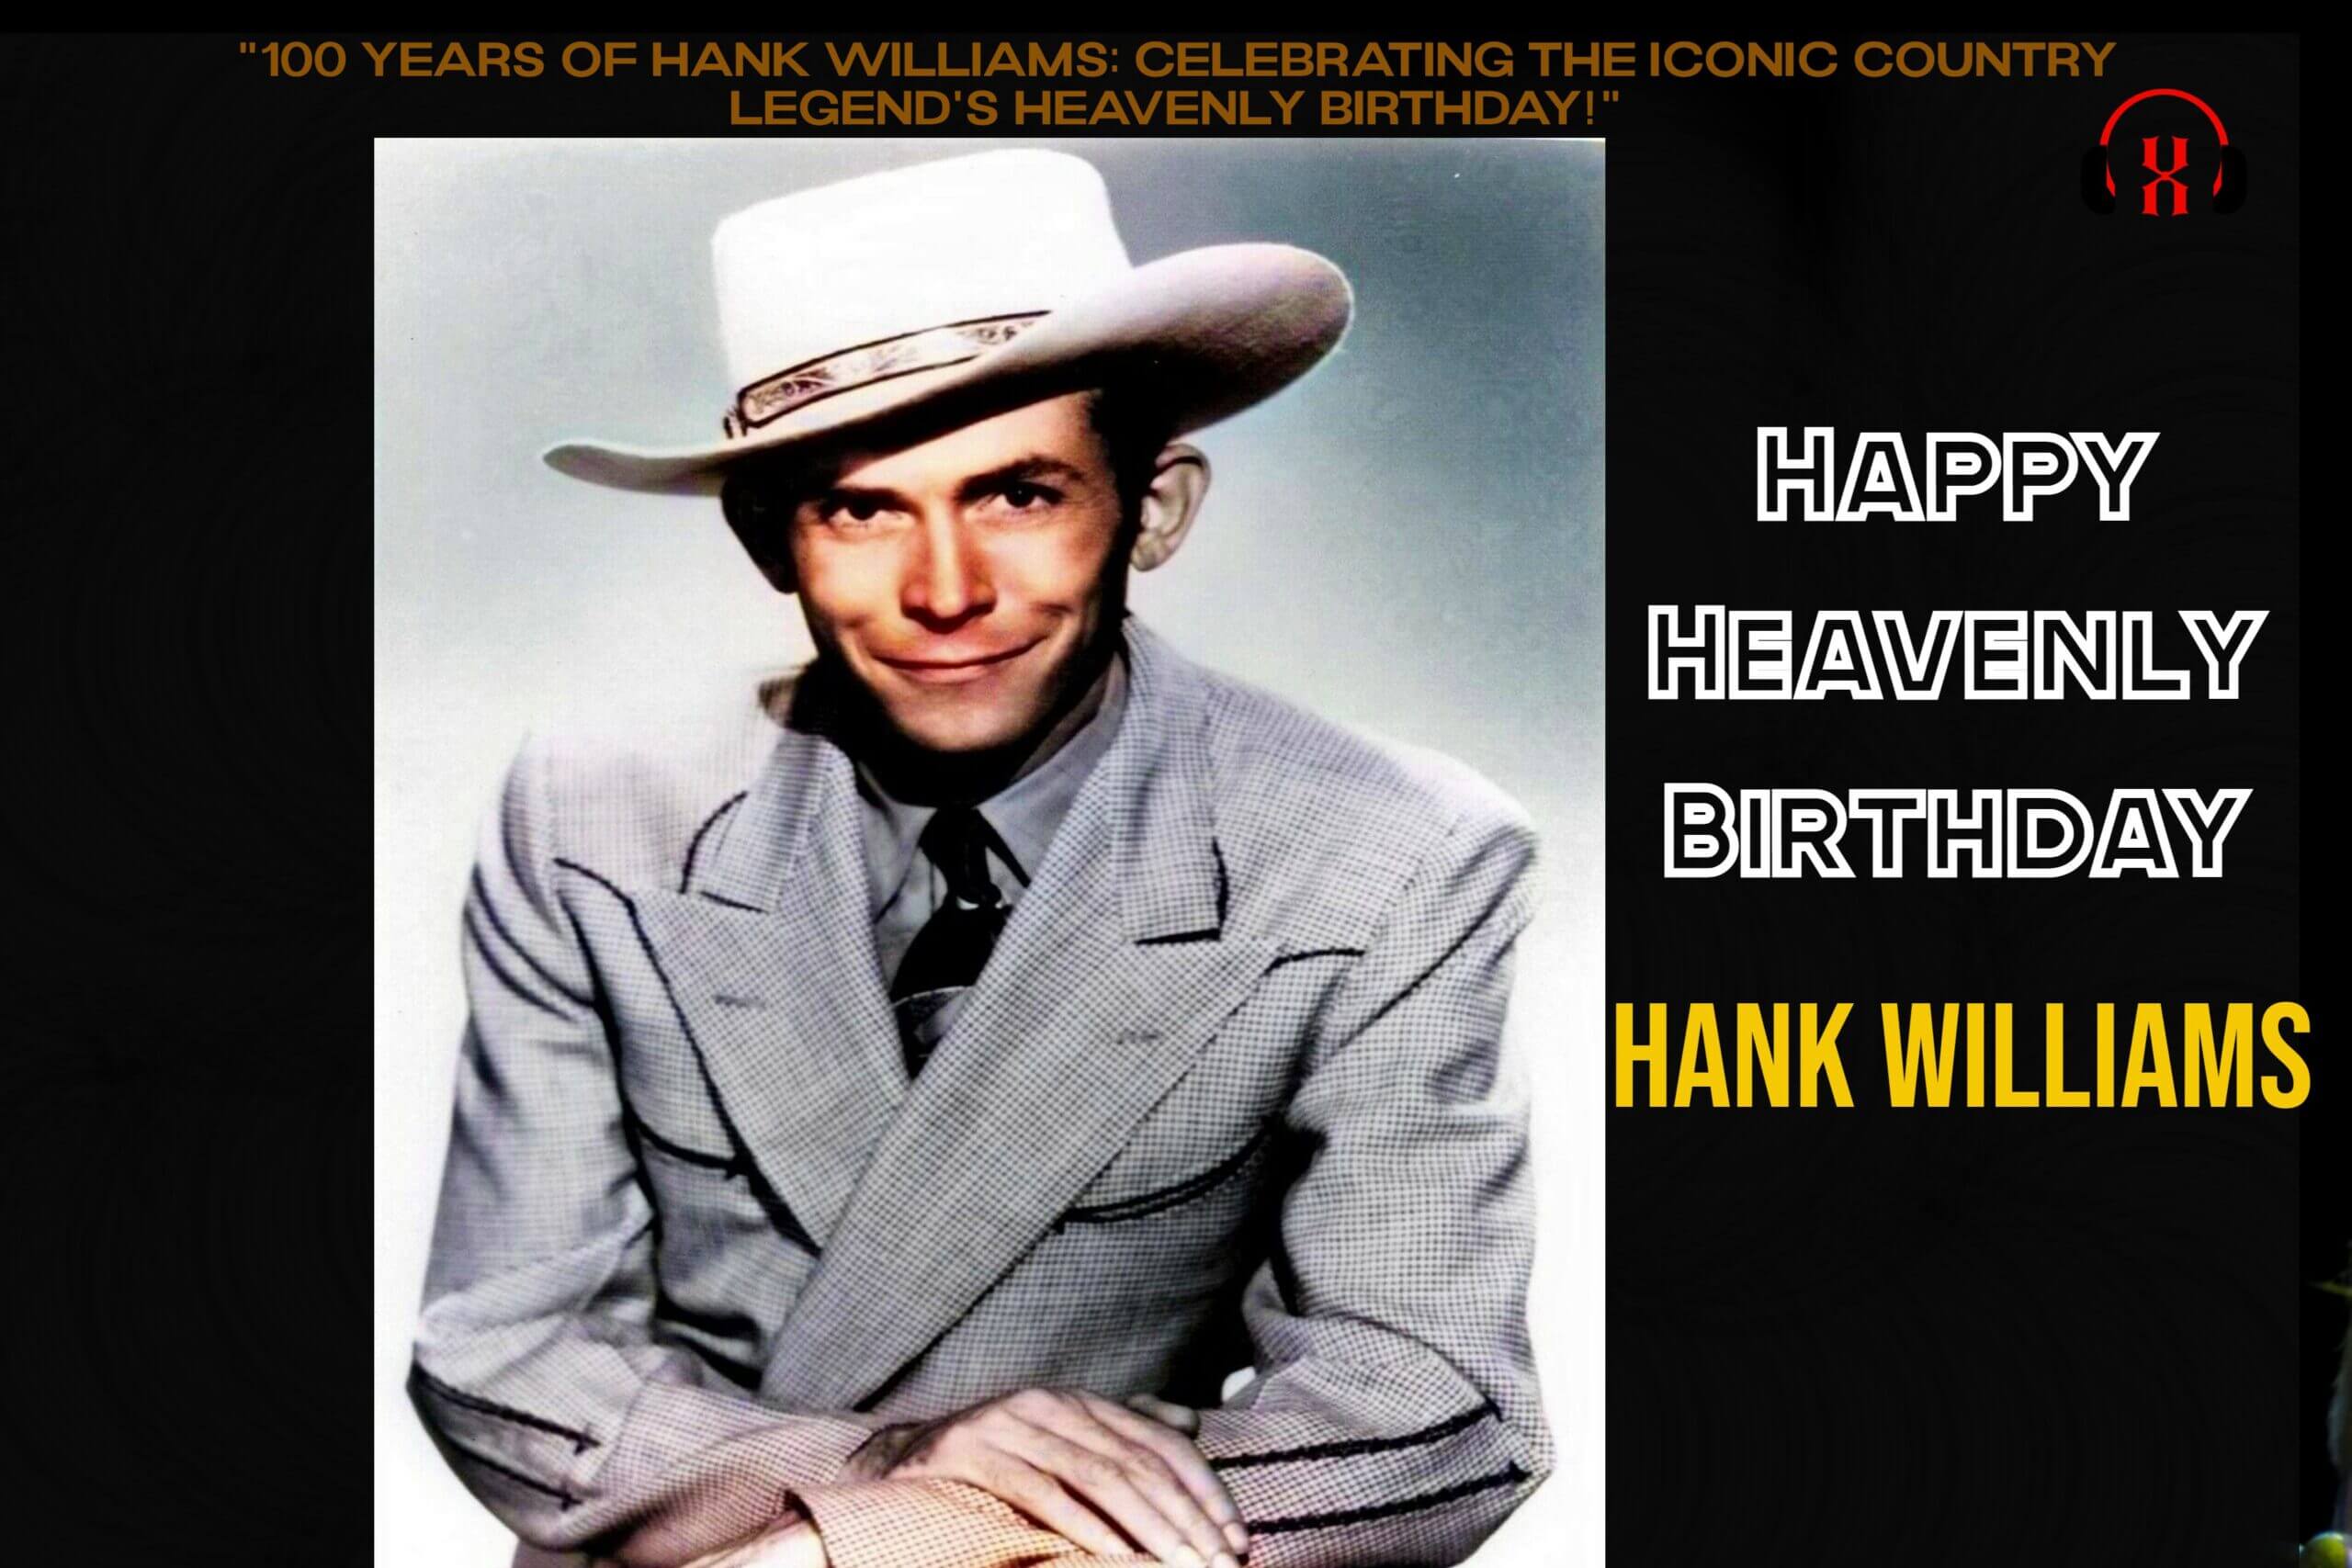 “100 Years of Hank Williams: Celebrating the Iconic Country Legend’s Heavenly Birthday!”